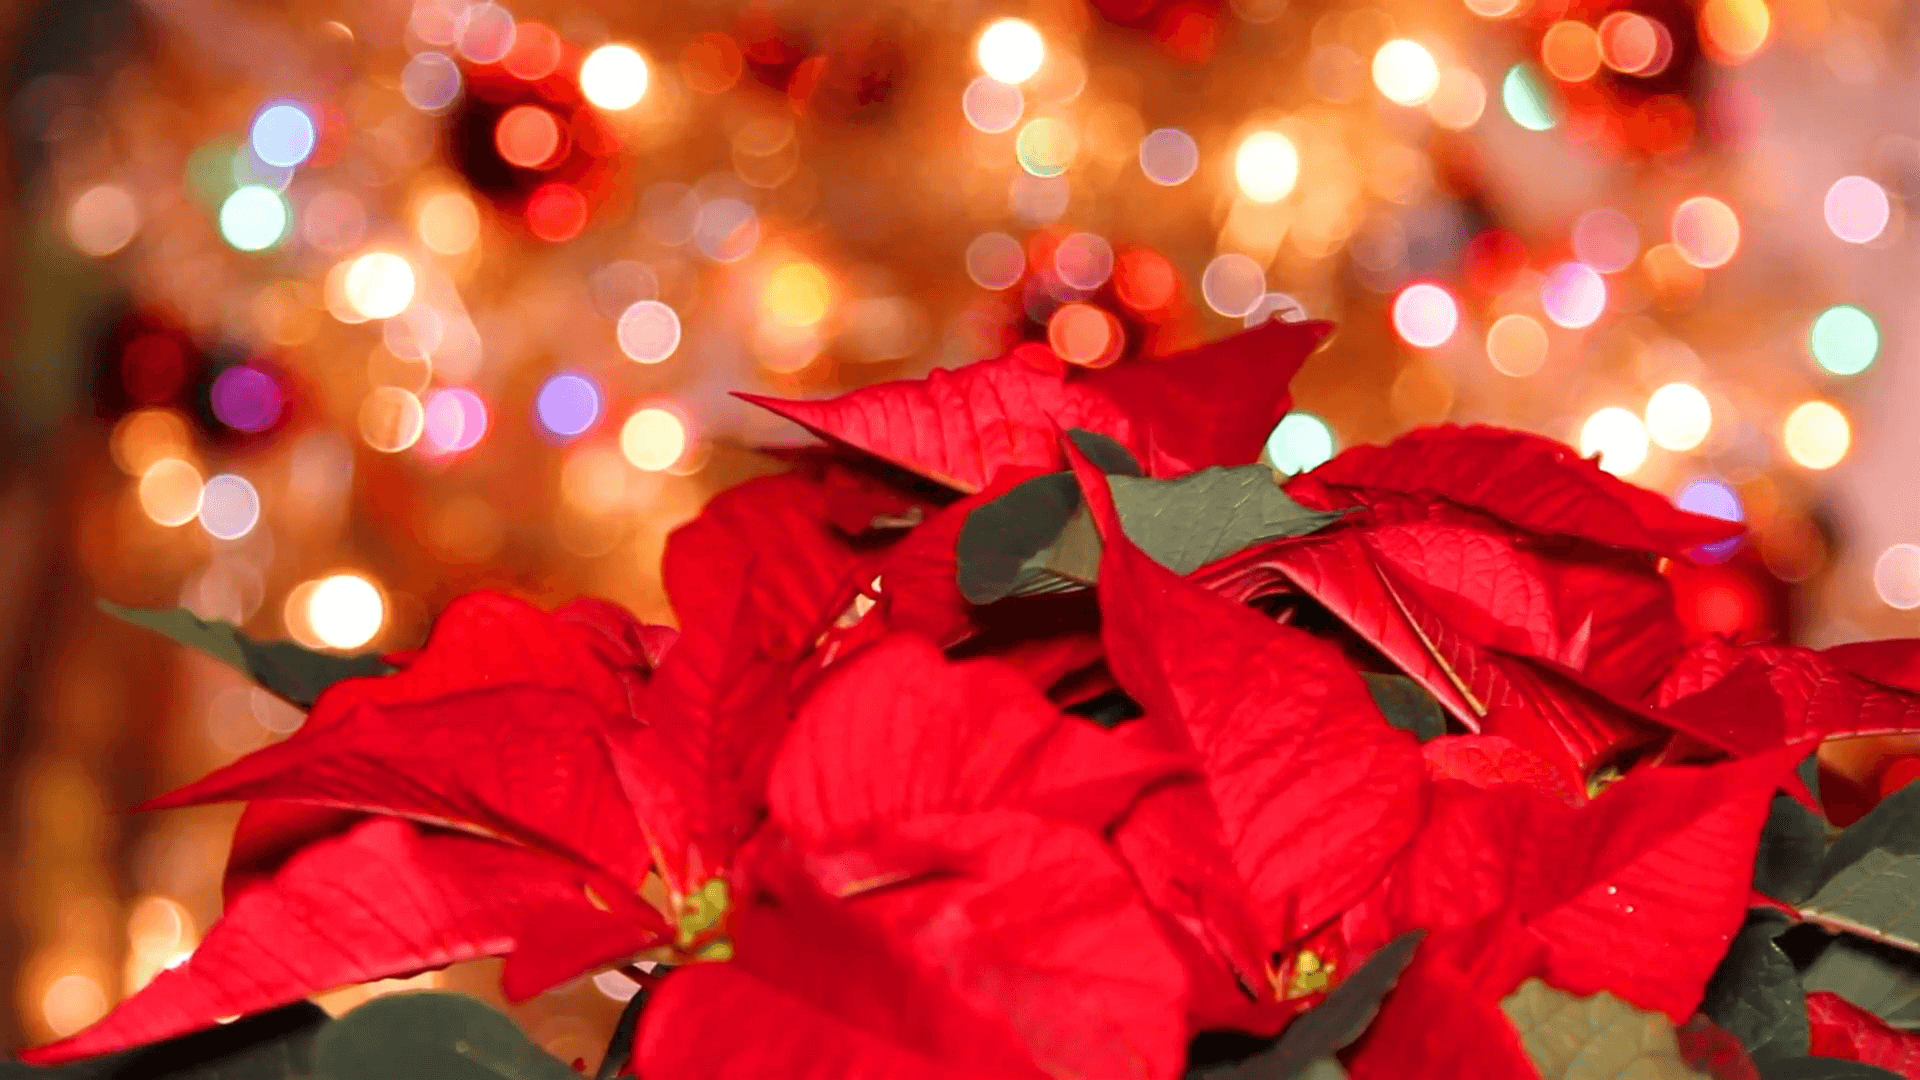 Red Poinsettia or Christmas flower with light effects and bright